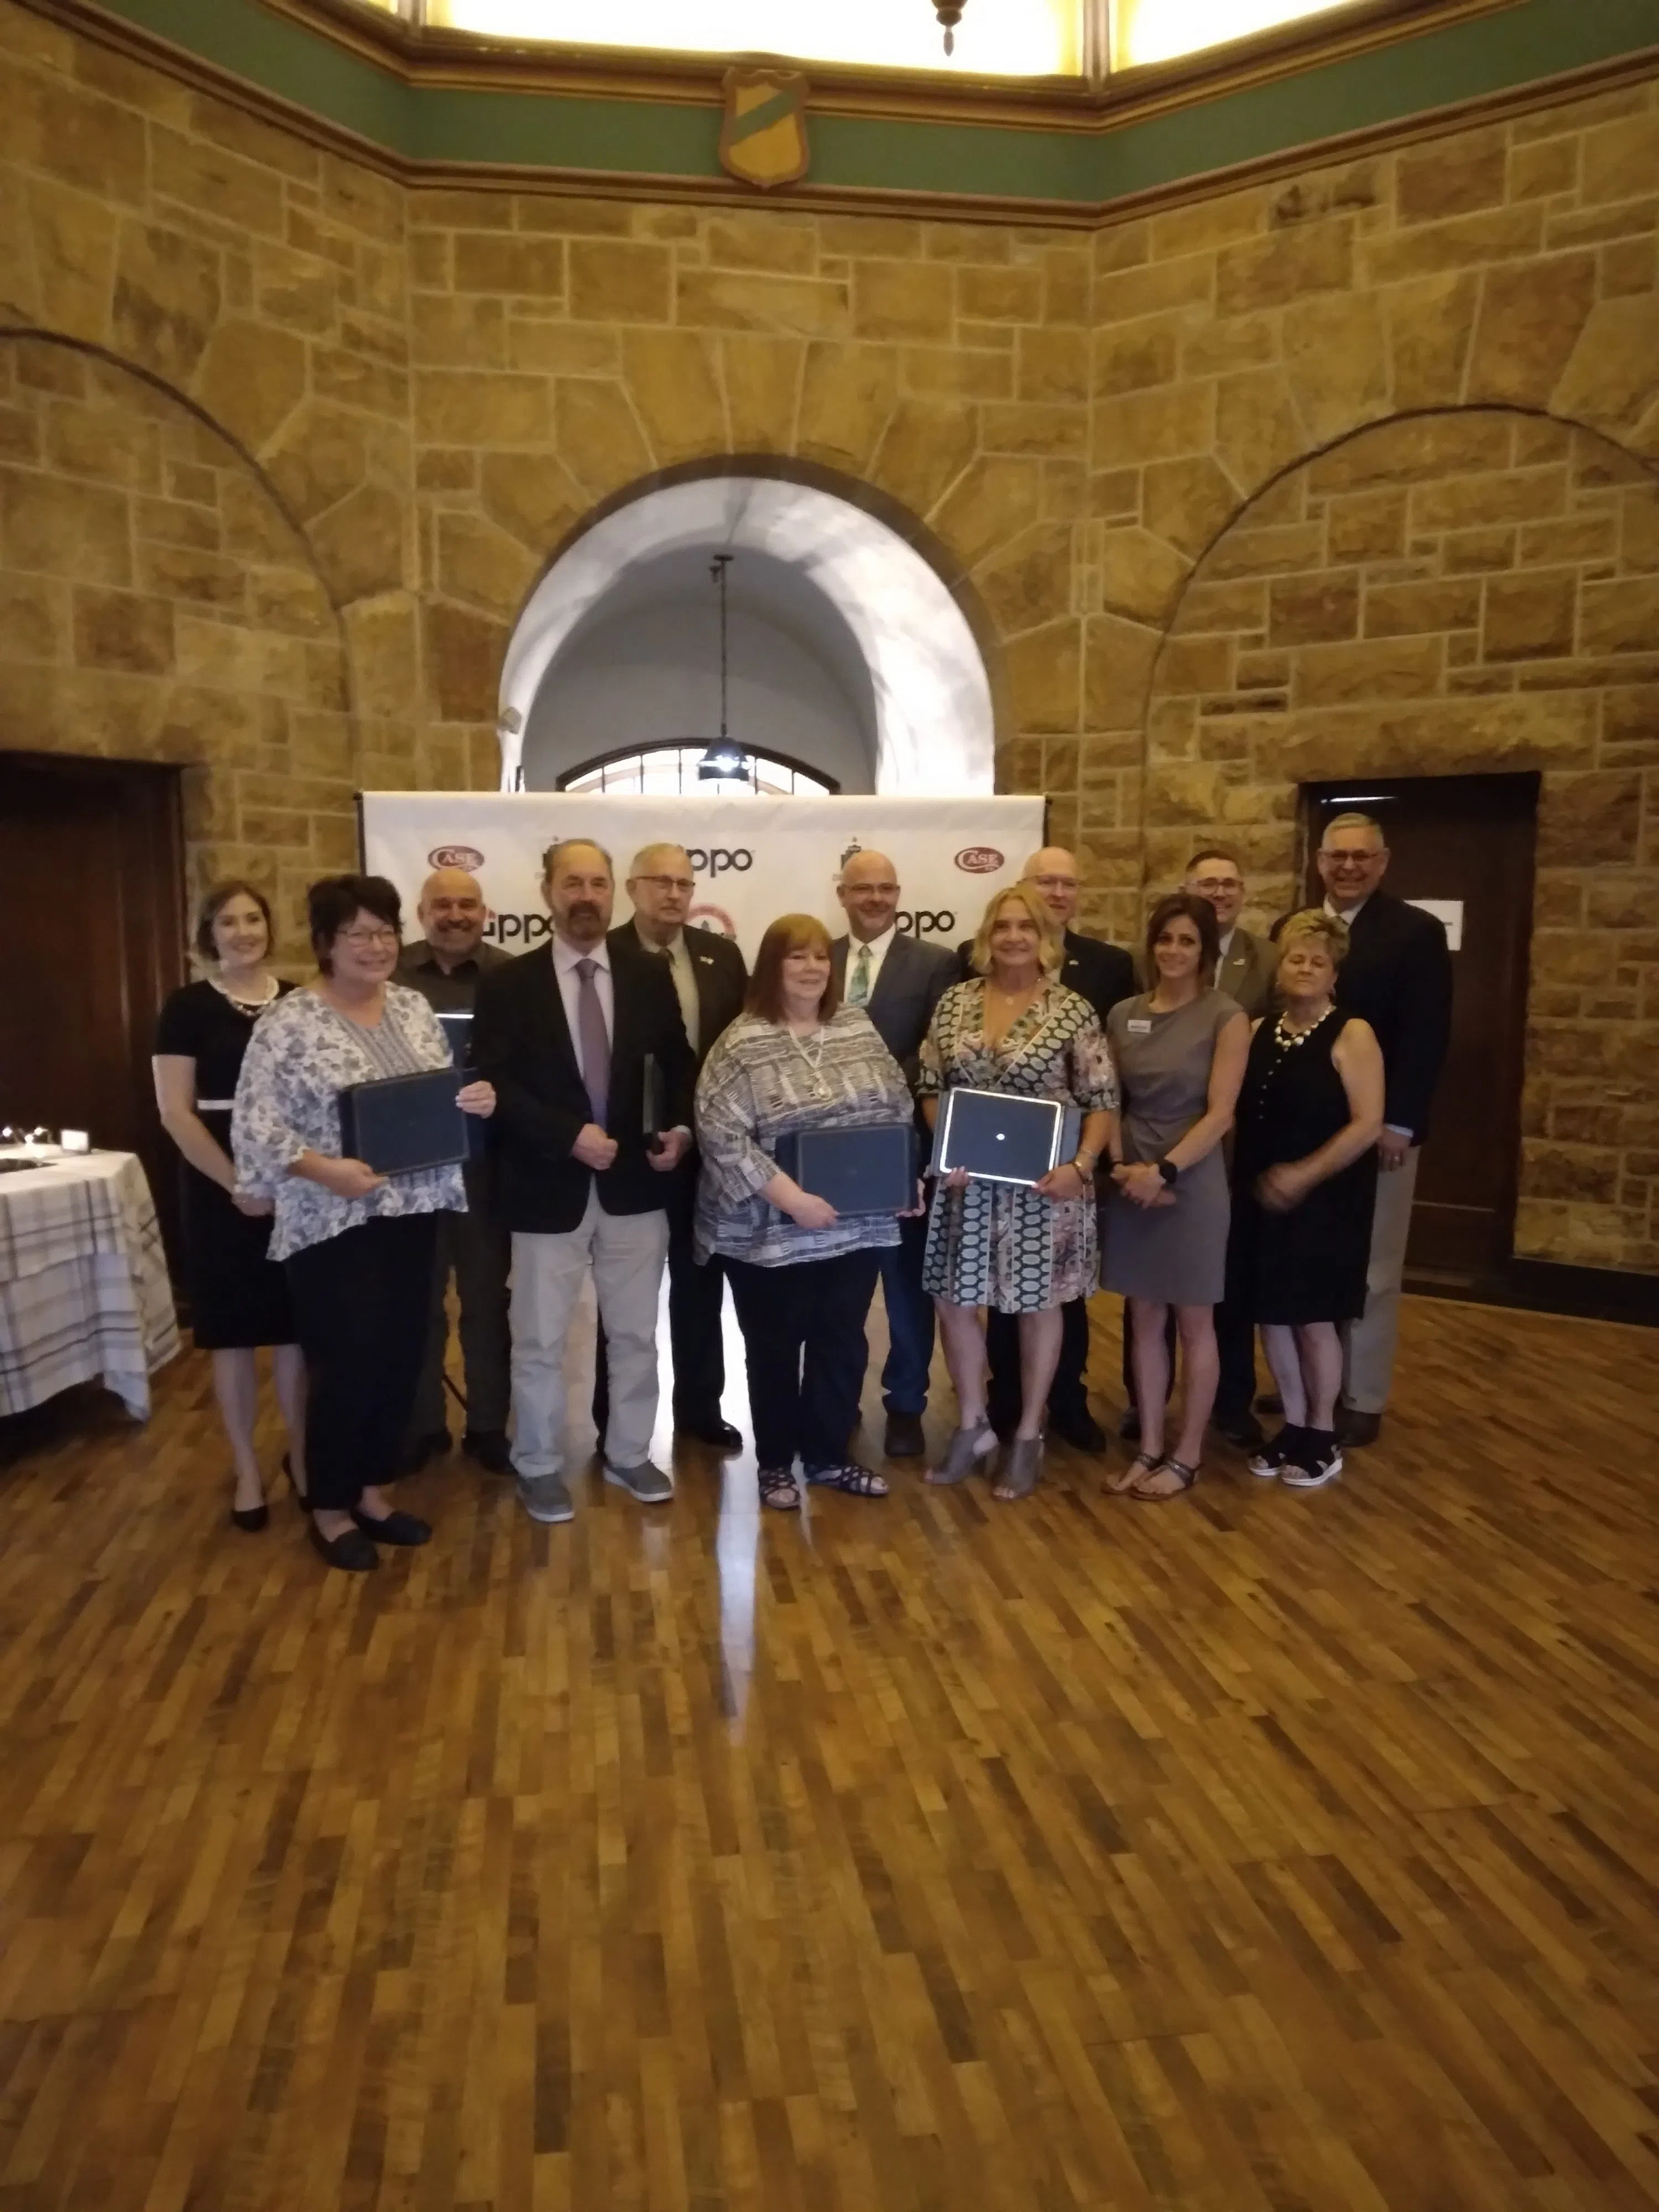 Bradford Area Chamber of Commerce Presents Annual Awards